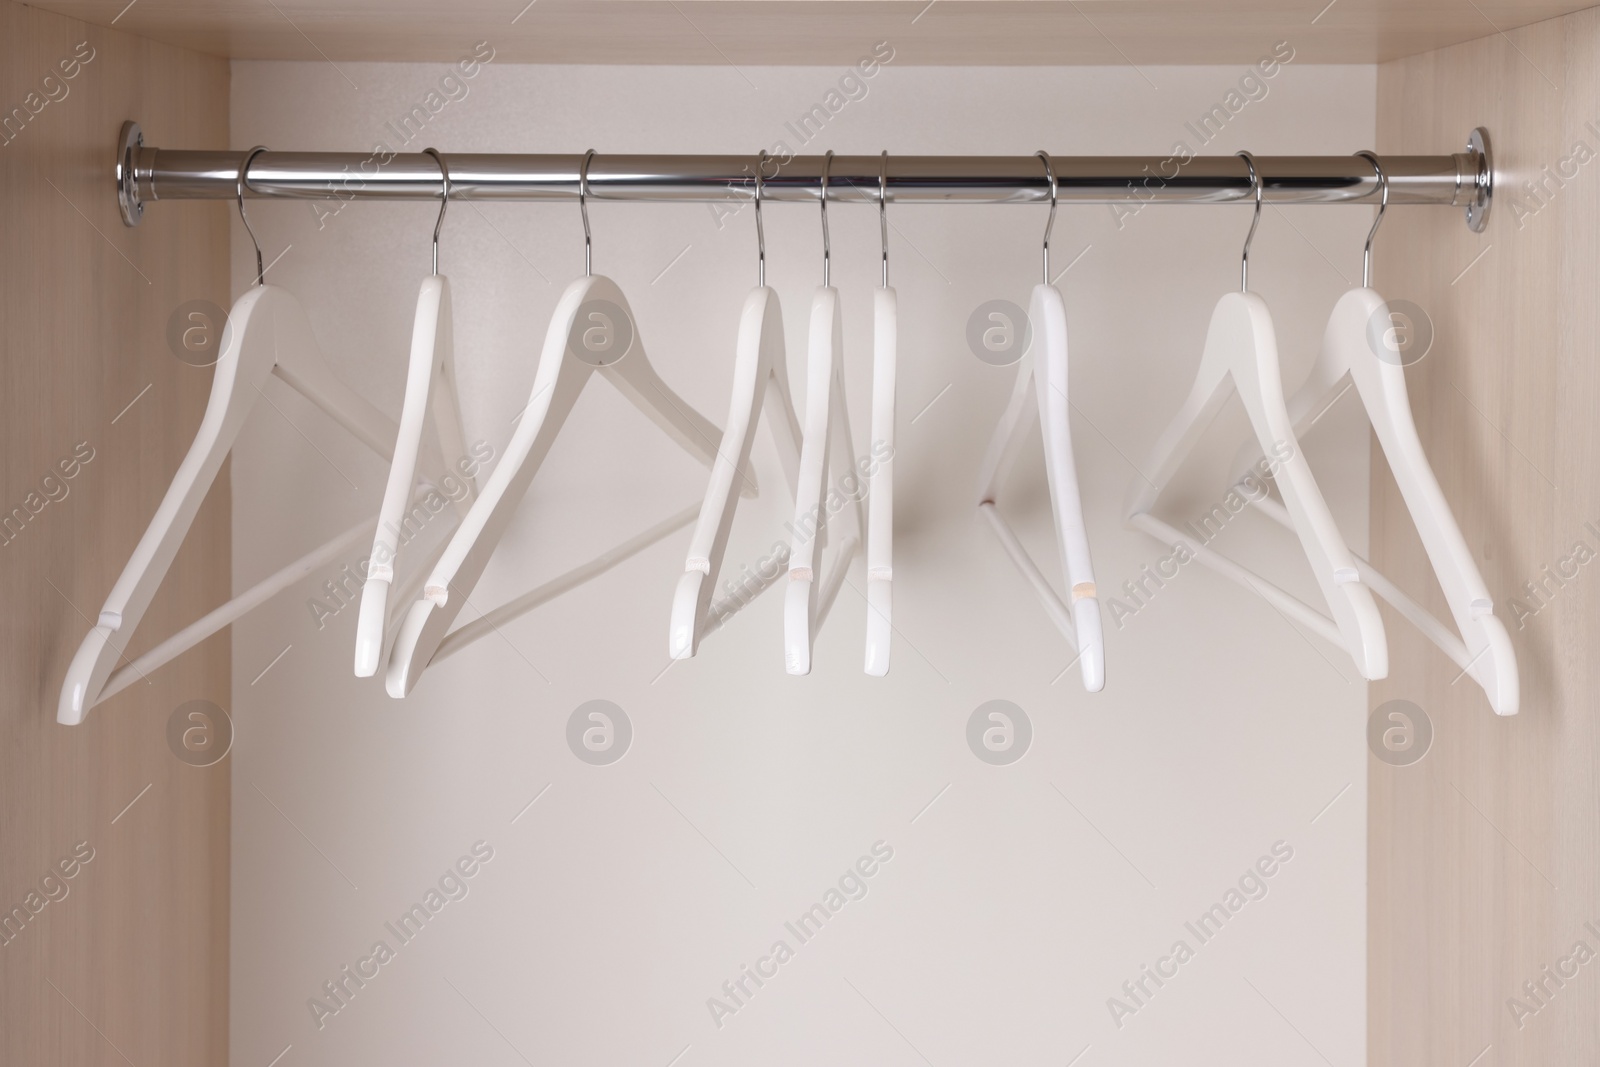 Photo of Setwooden clothes hangers on wardrobe rail